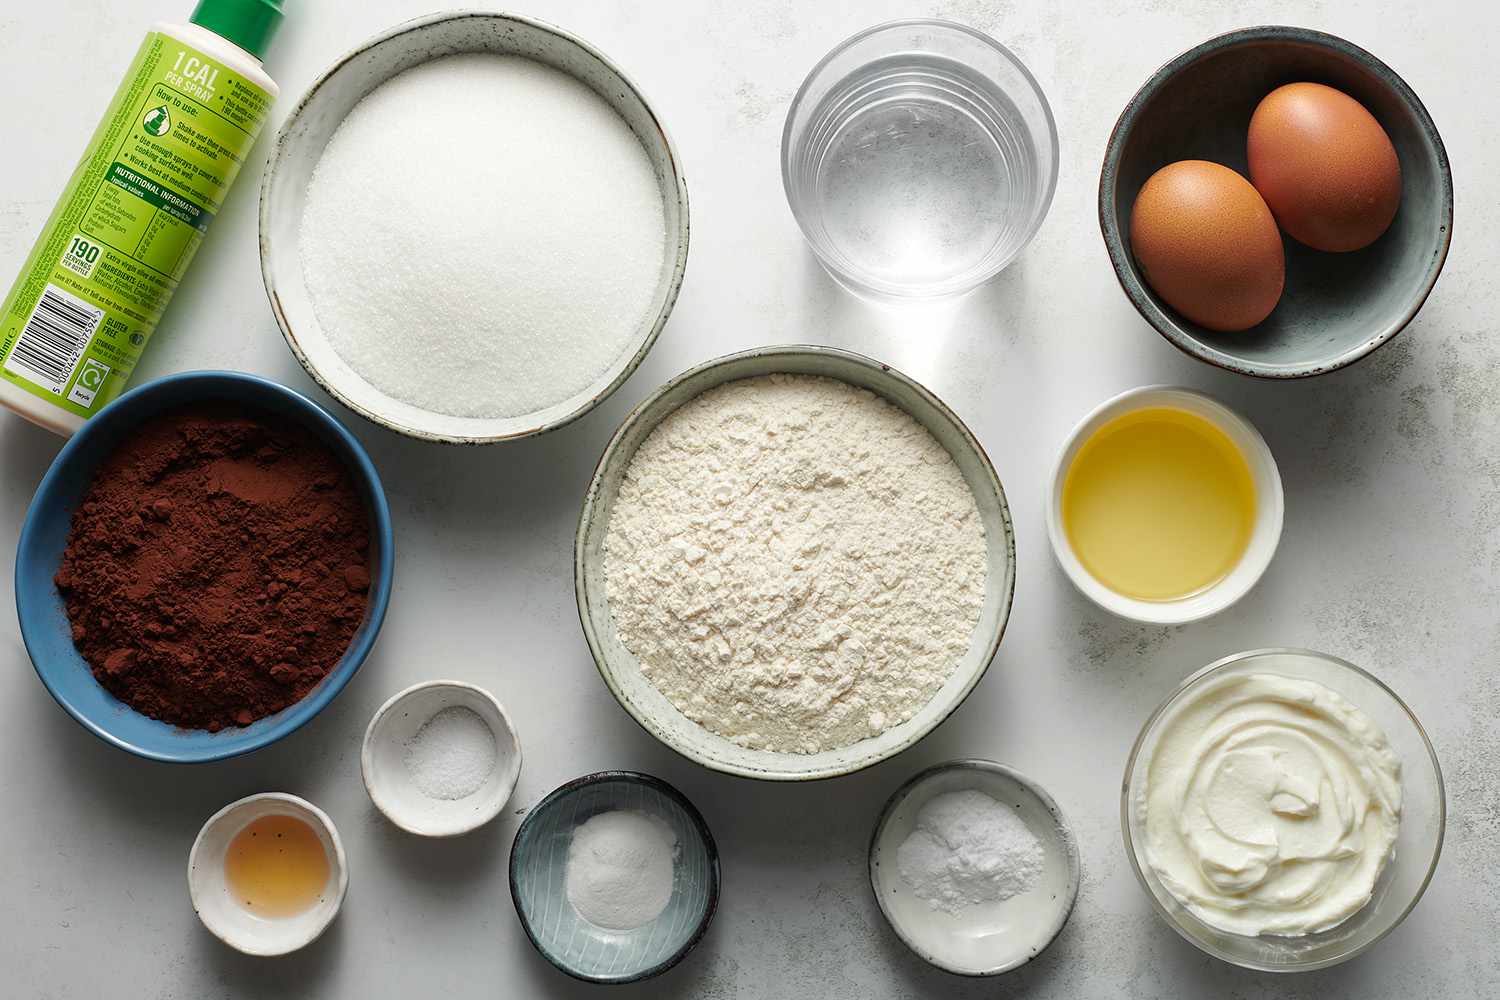 ingredients to make chocolate cupcakes